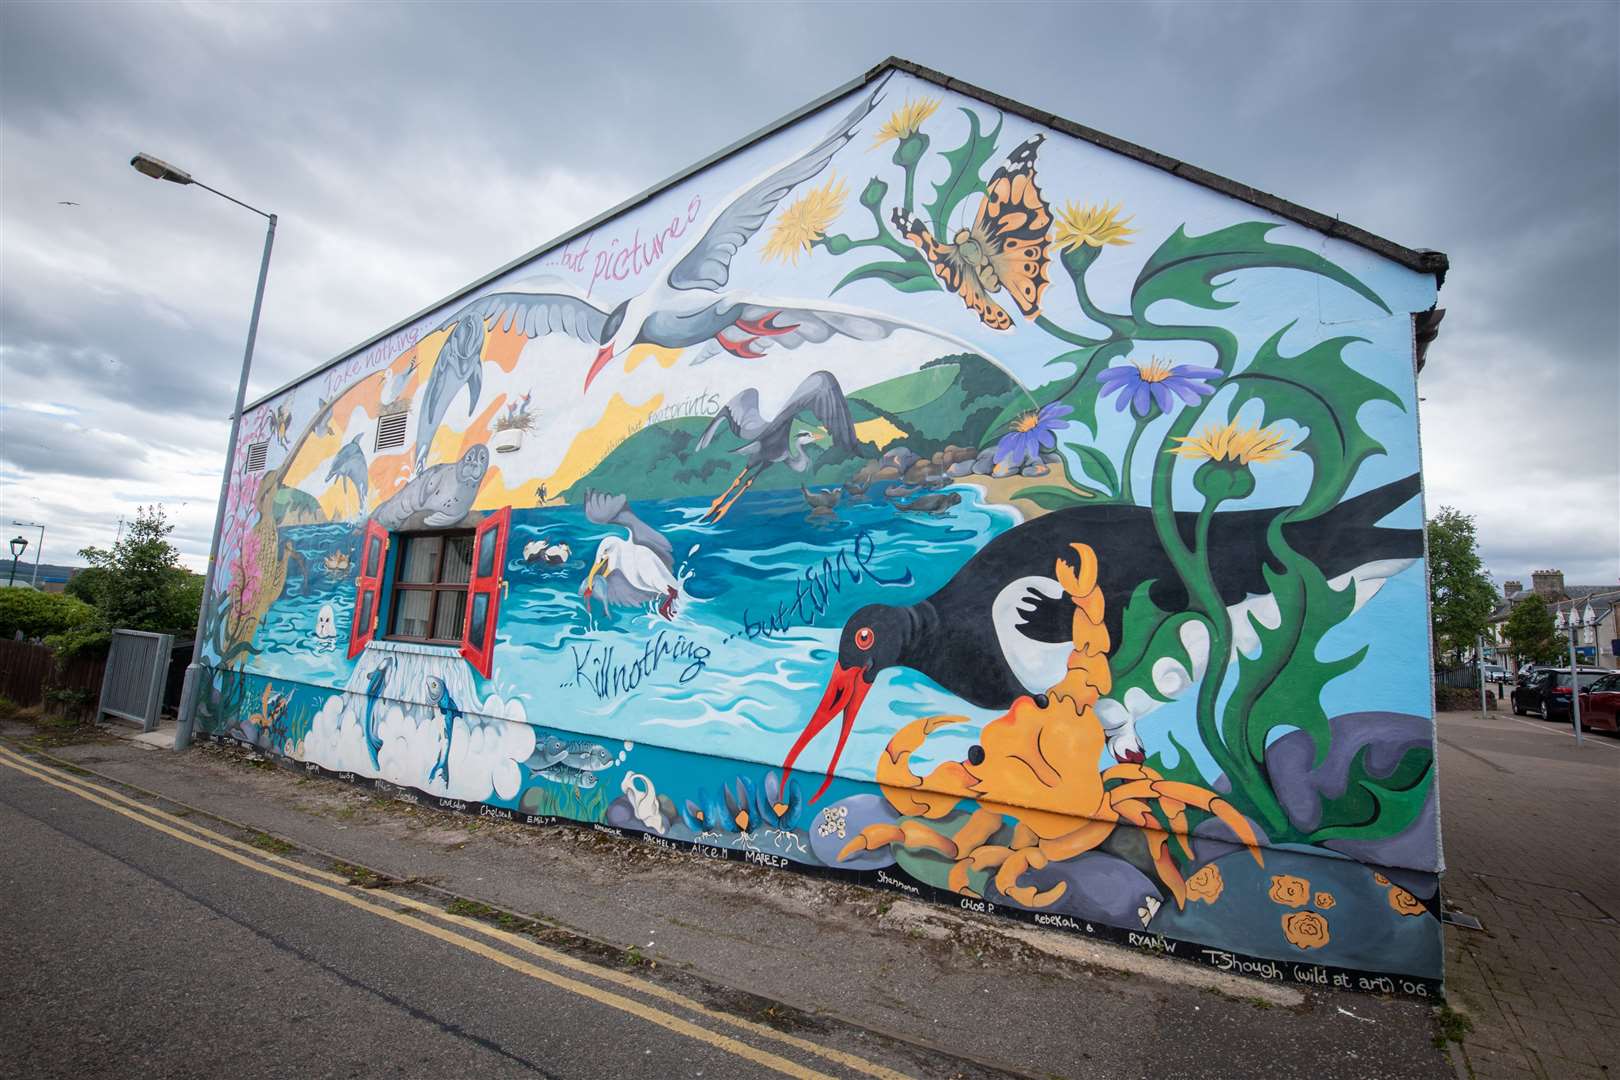 The bold murals are a talking point for visitors and locals alike.